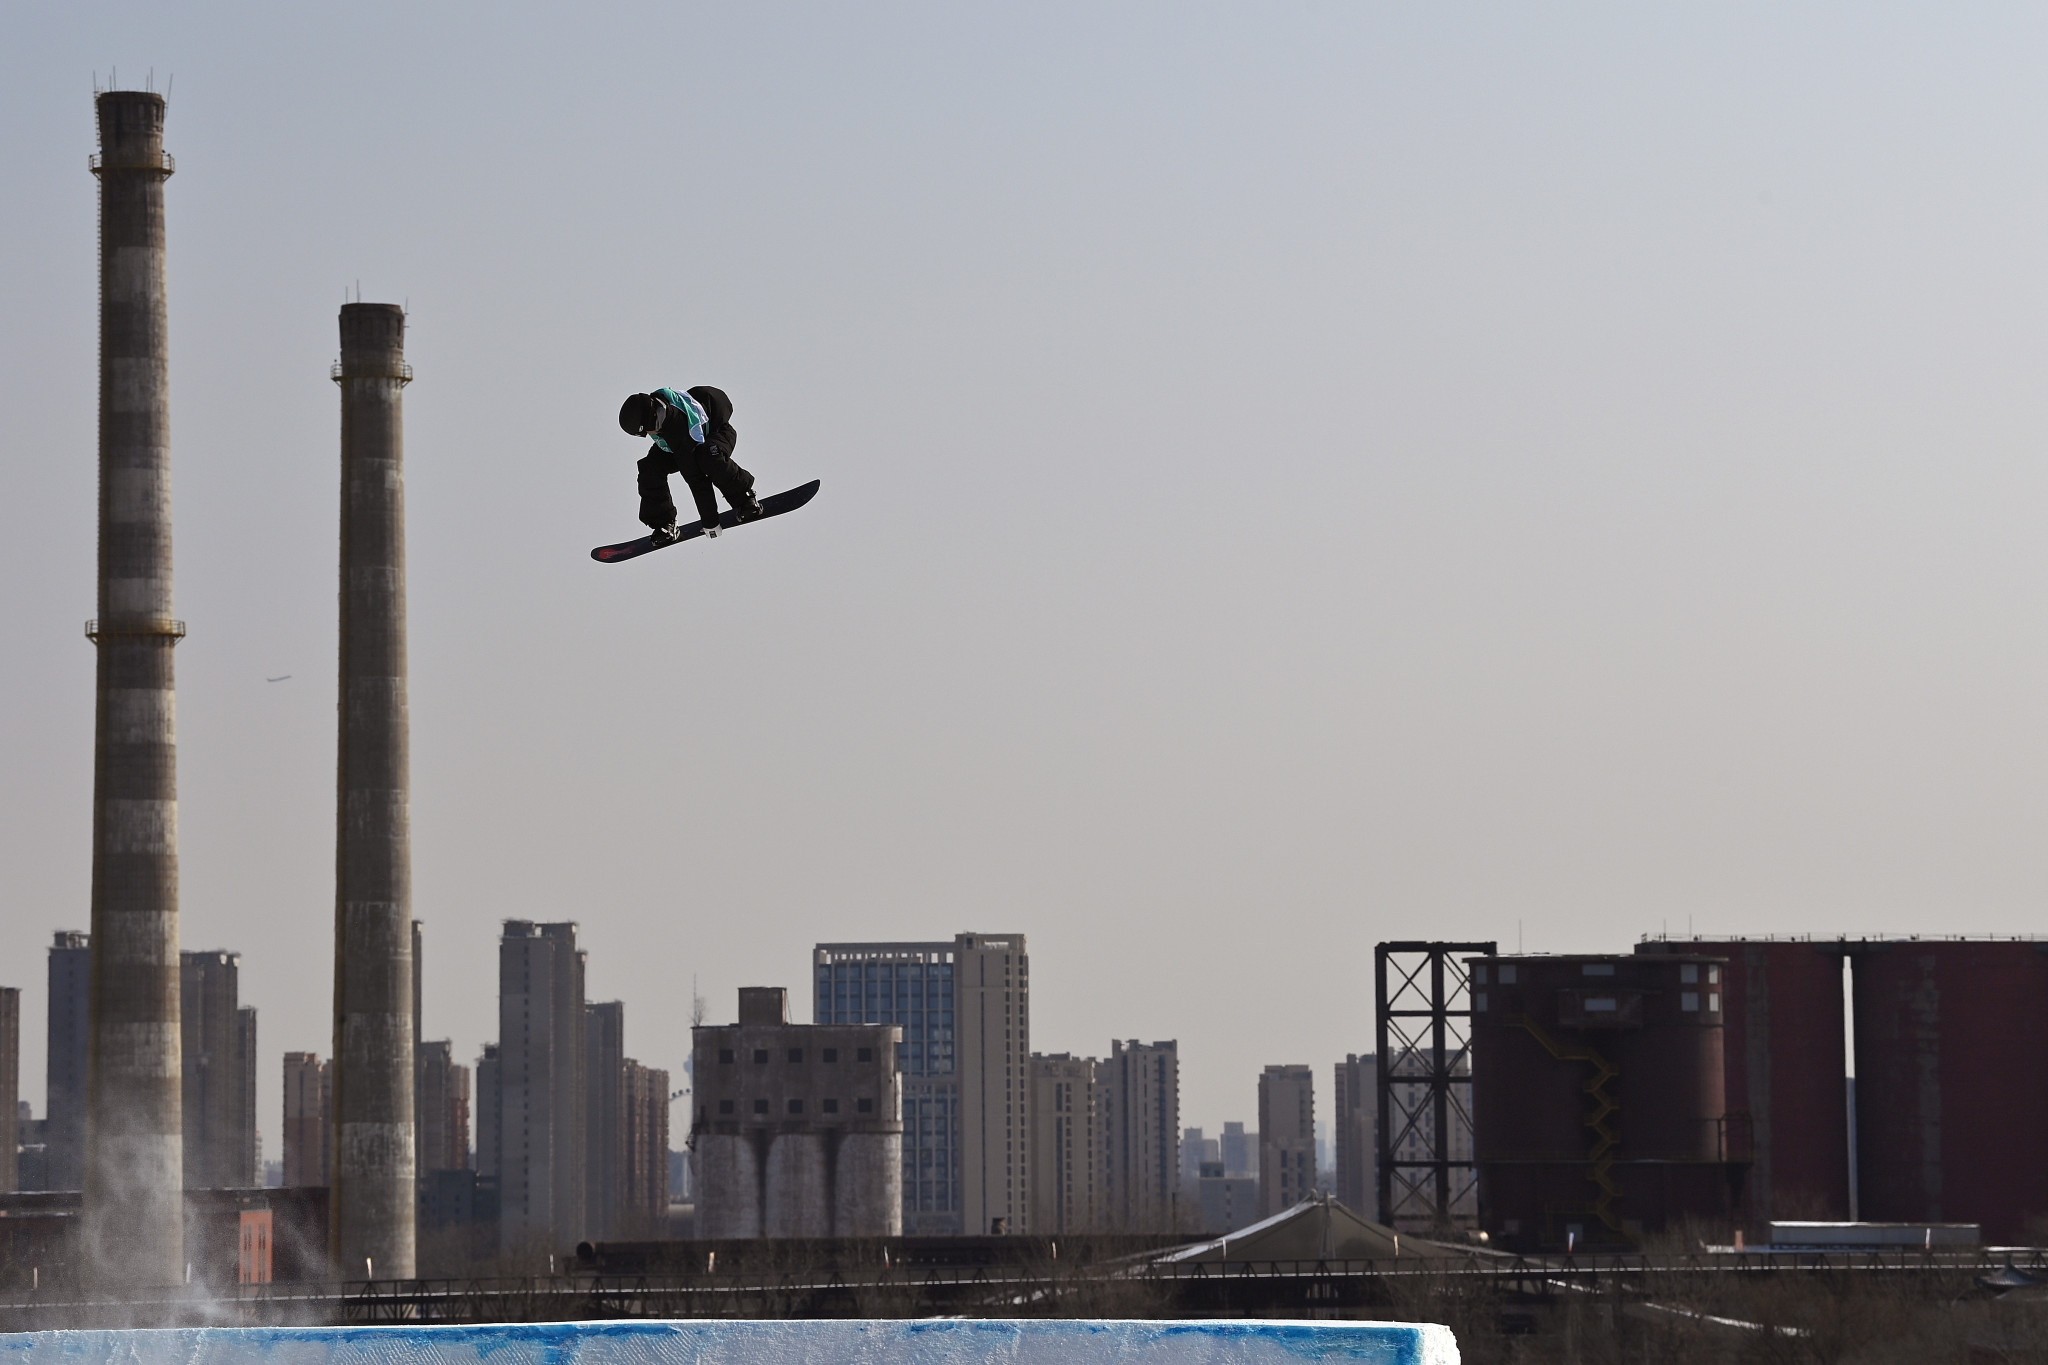 New Zealand's Zoi Sadowski Synnott claimed the silver medal at Big Air Shougang today ©Getty Images